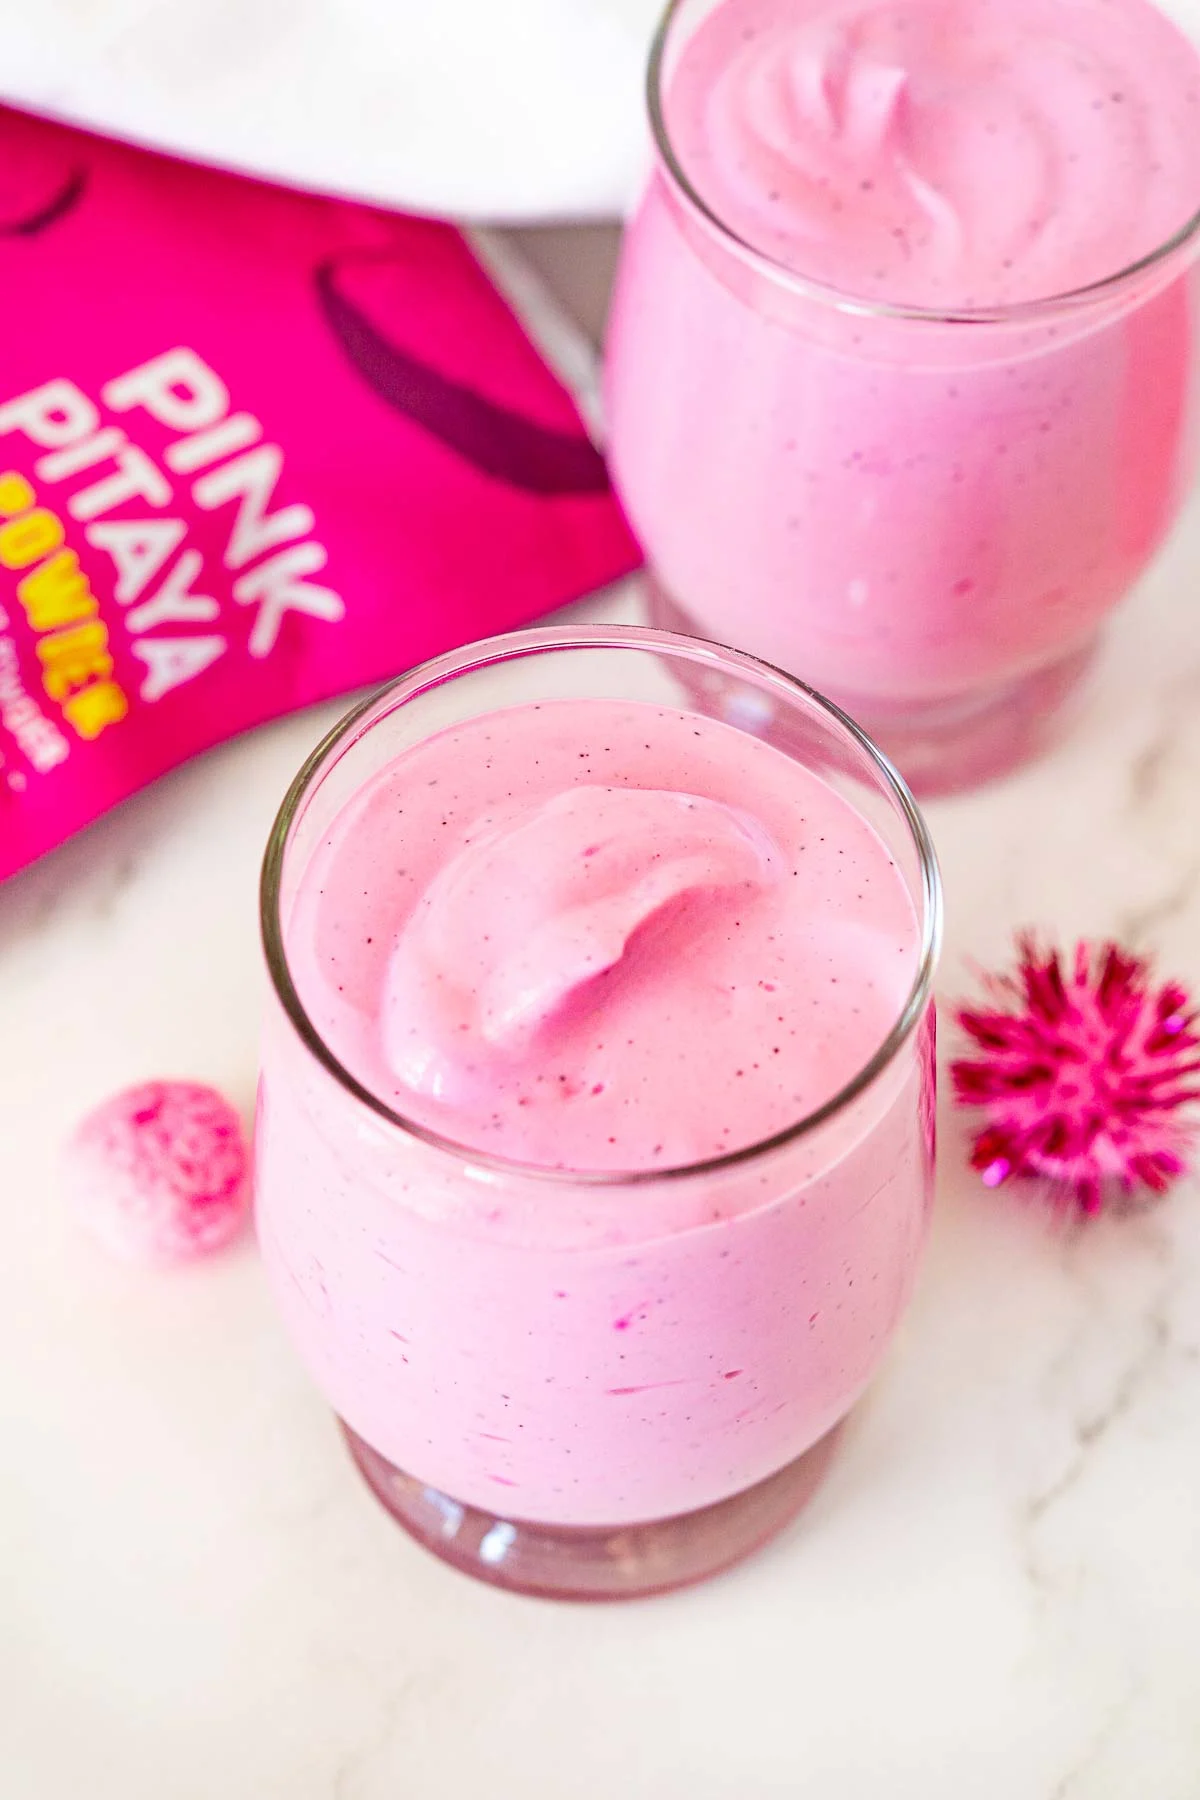 whipped cottage cheese blended with dragon fruit powder